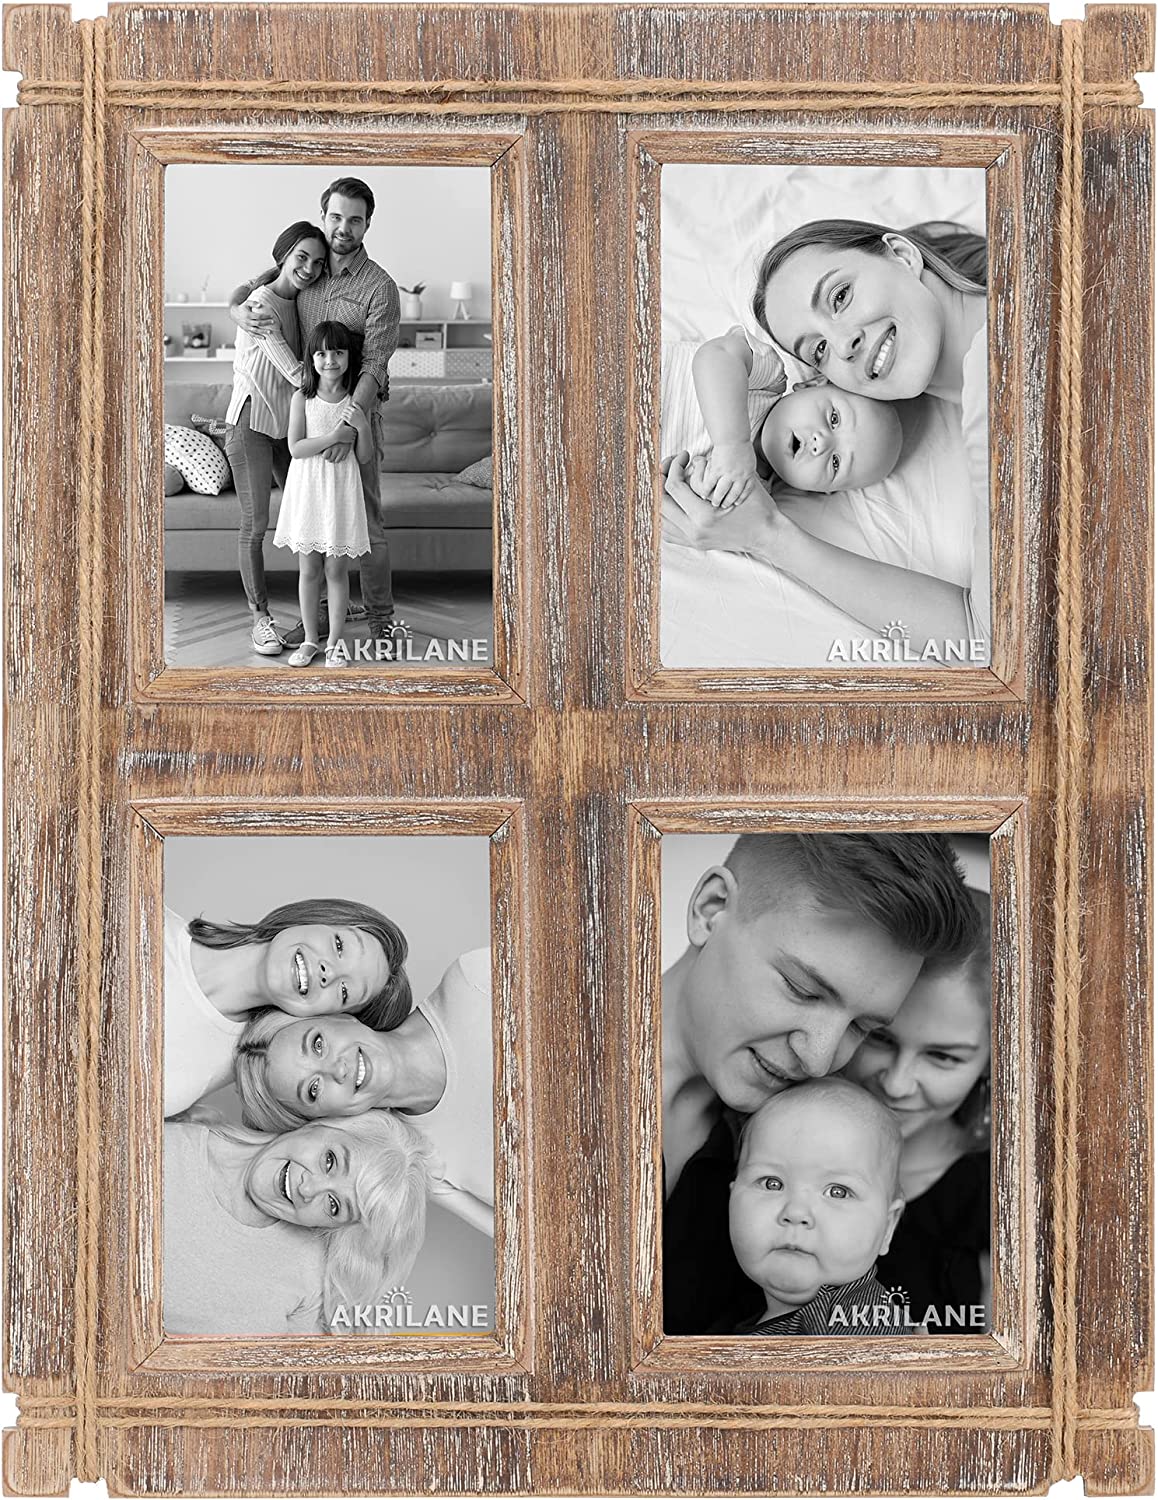 Akrilane - 4x6, 4 Openings -Wooden Photo Frame | Vintage Style Rustic Looking 4 by 6 Wood Frames For Wall Display with Acrylic Cover | Decorative Distressed Collage Photo Frames - Light Rope - Akrilane